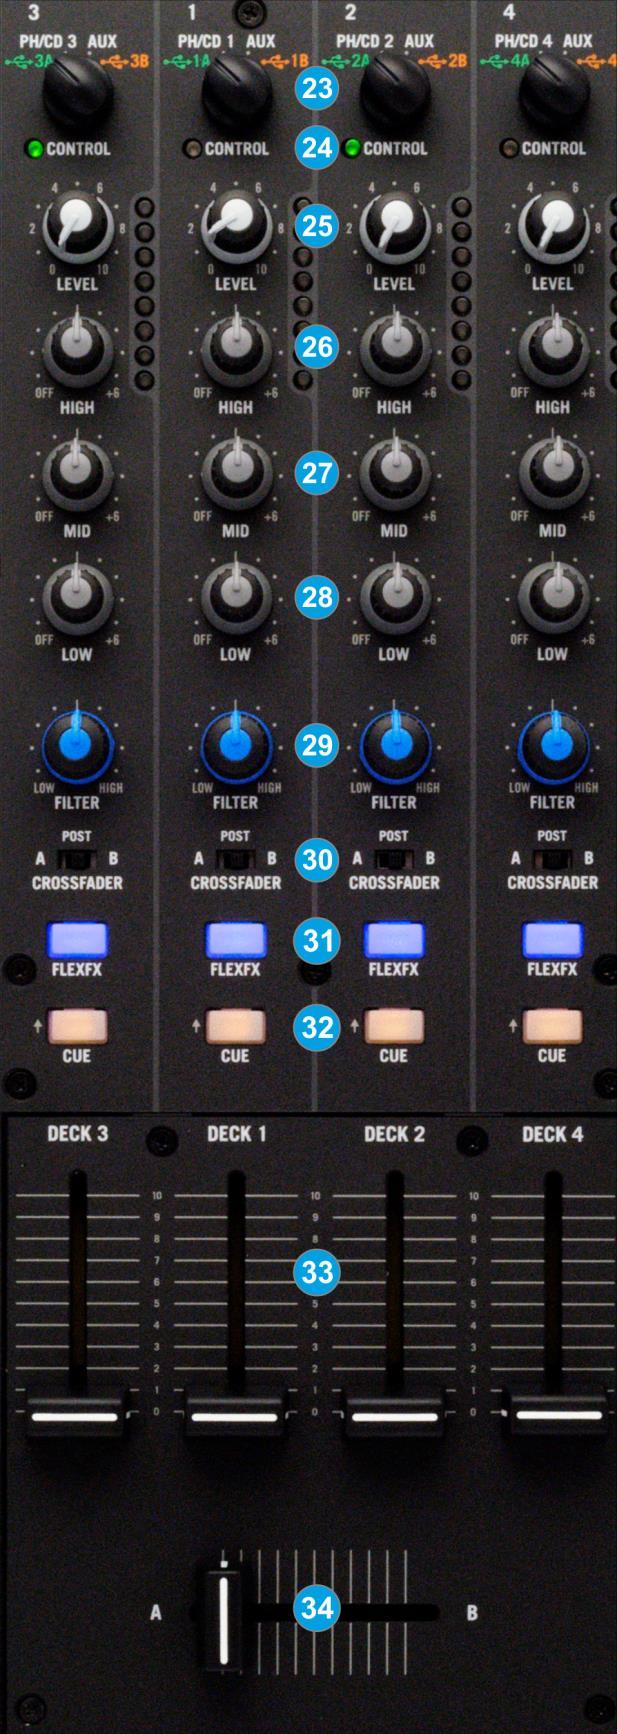 C. Mixer 23. USB/INPUT SEL. Set this selector to the appropriate position to define which Channel Input will be routed to the 4 Mixer Channel Outputs (DECK 1 to DECK 4).